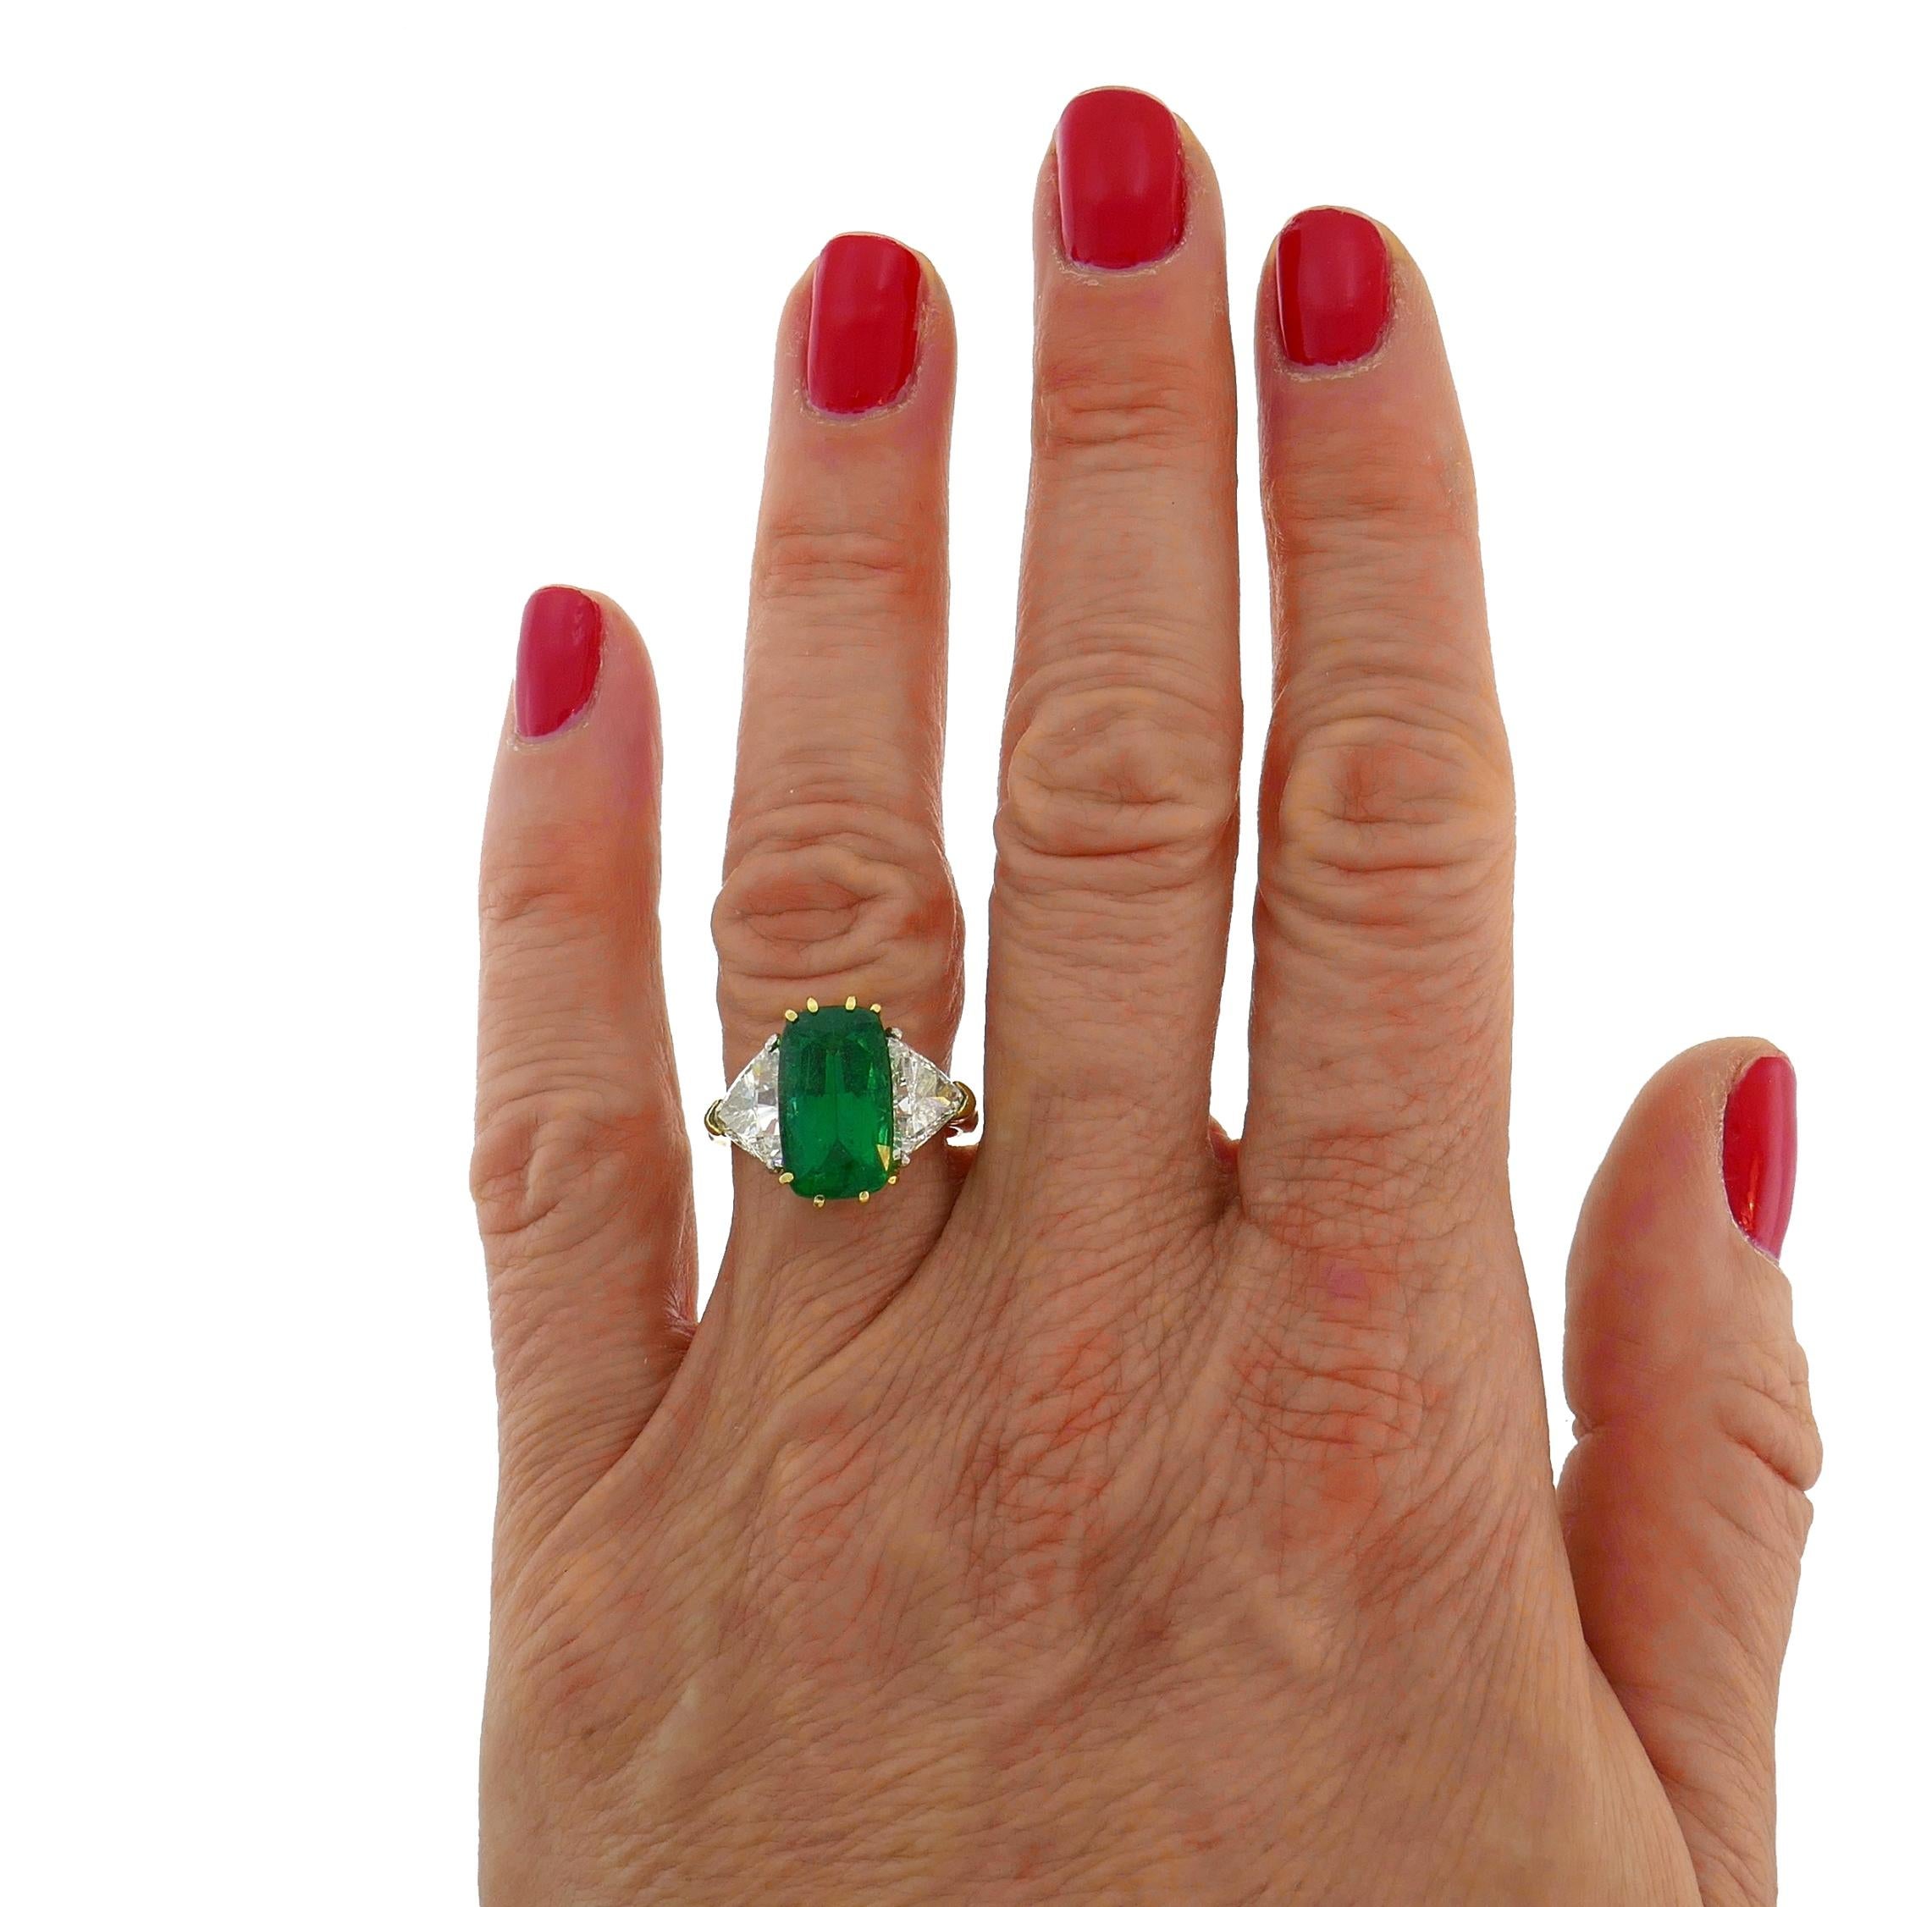 Classy and timeless three-stone ring. The ring features a beautiful cushion cut natural emerald flanked with two trillion cut diamonds. The emerald measures 13.57 x 8.02 x 6.32 mm and weights approximately 4.75-carat. It comes with a Guild